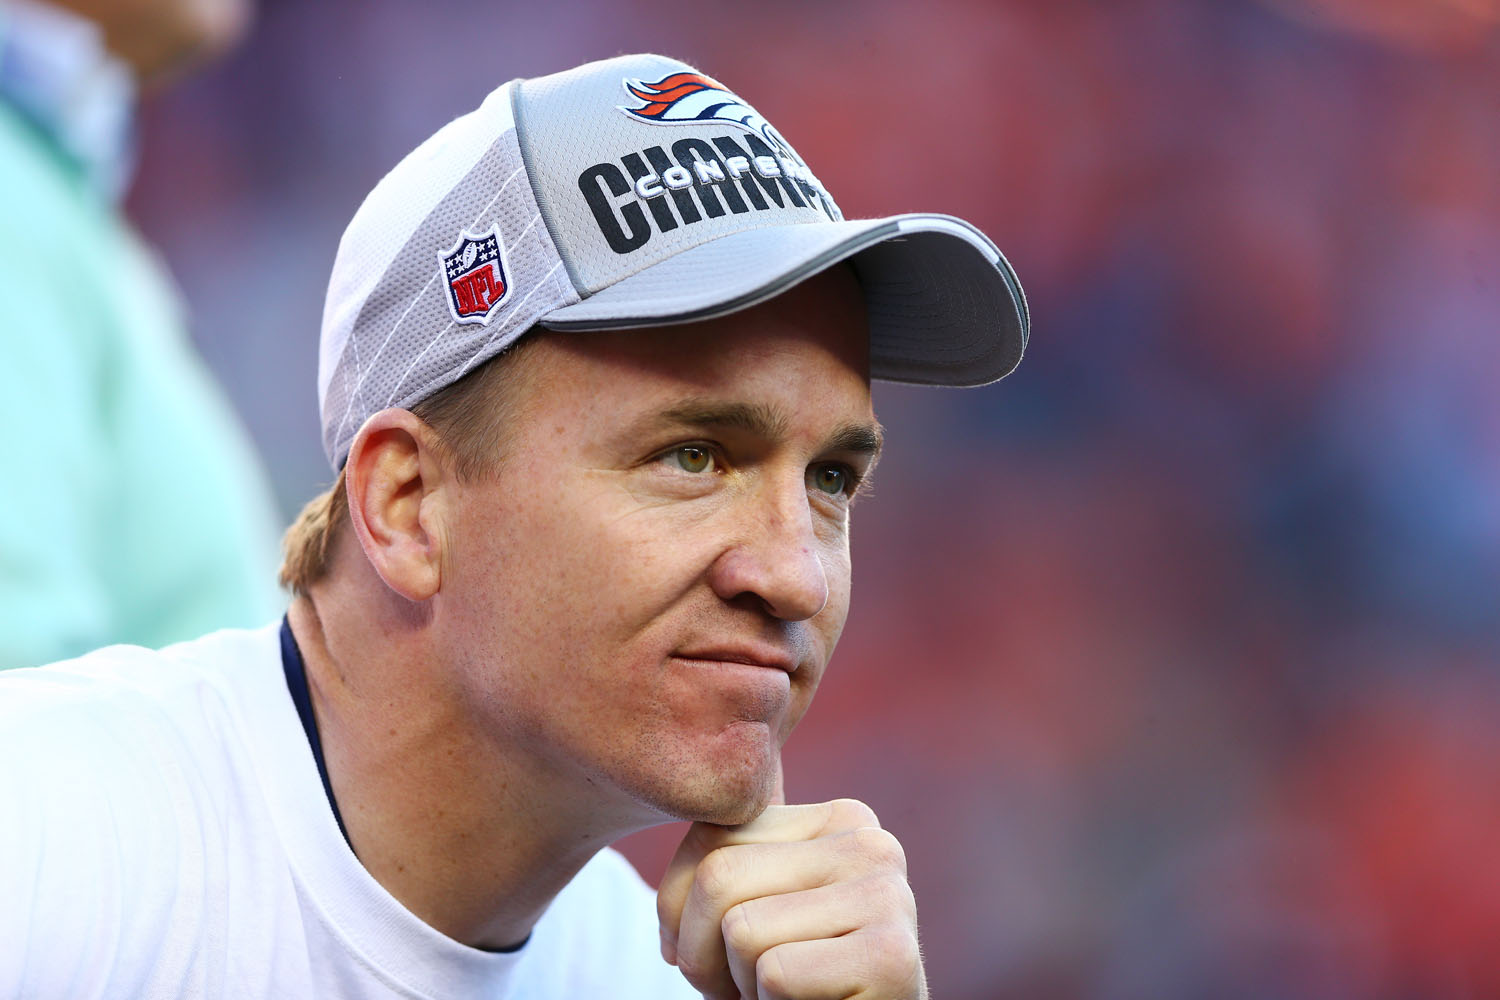 Peyton Manning during the AFC Championship game at Sports Authority Field at Mile High on January 19, 2014 in Denver, Colorado.